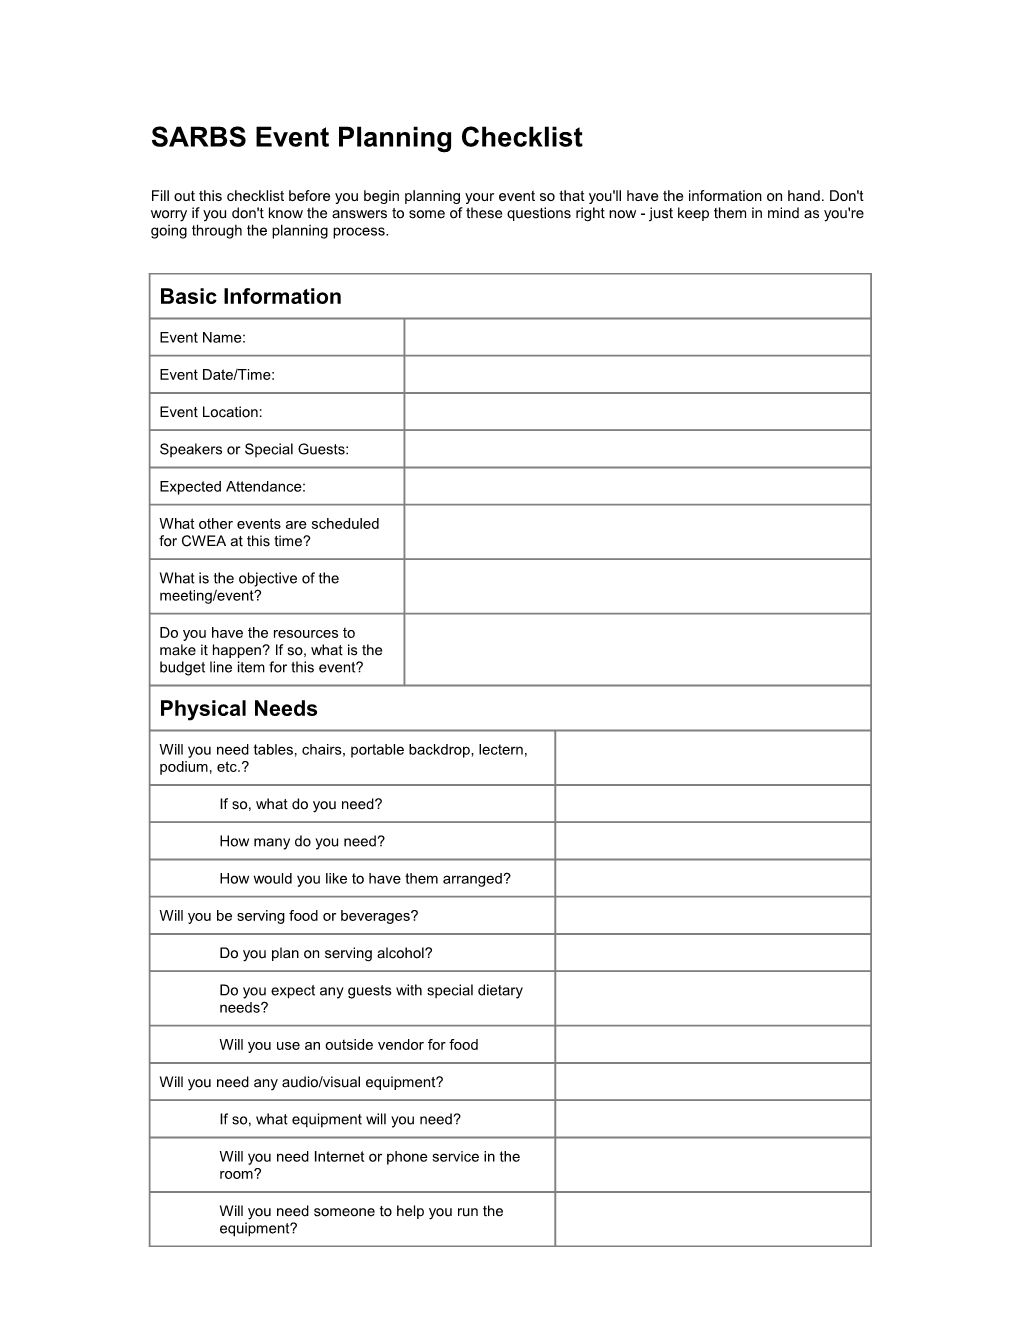 Fill out This Checklist Before You Begin Planning Your Event So That You'll Have the Information